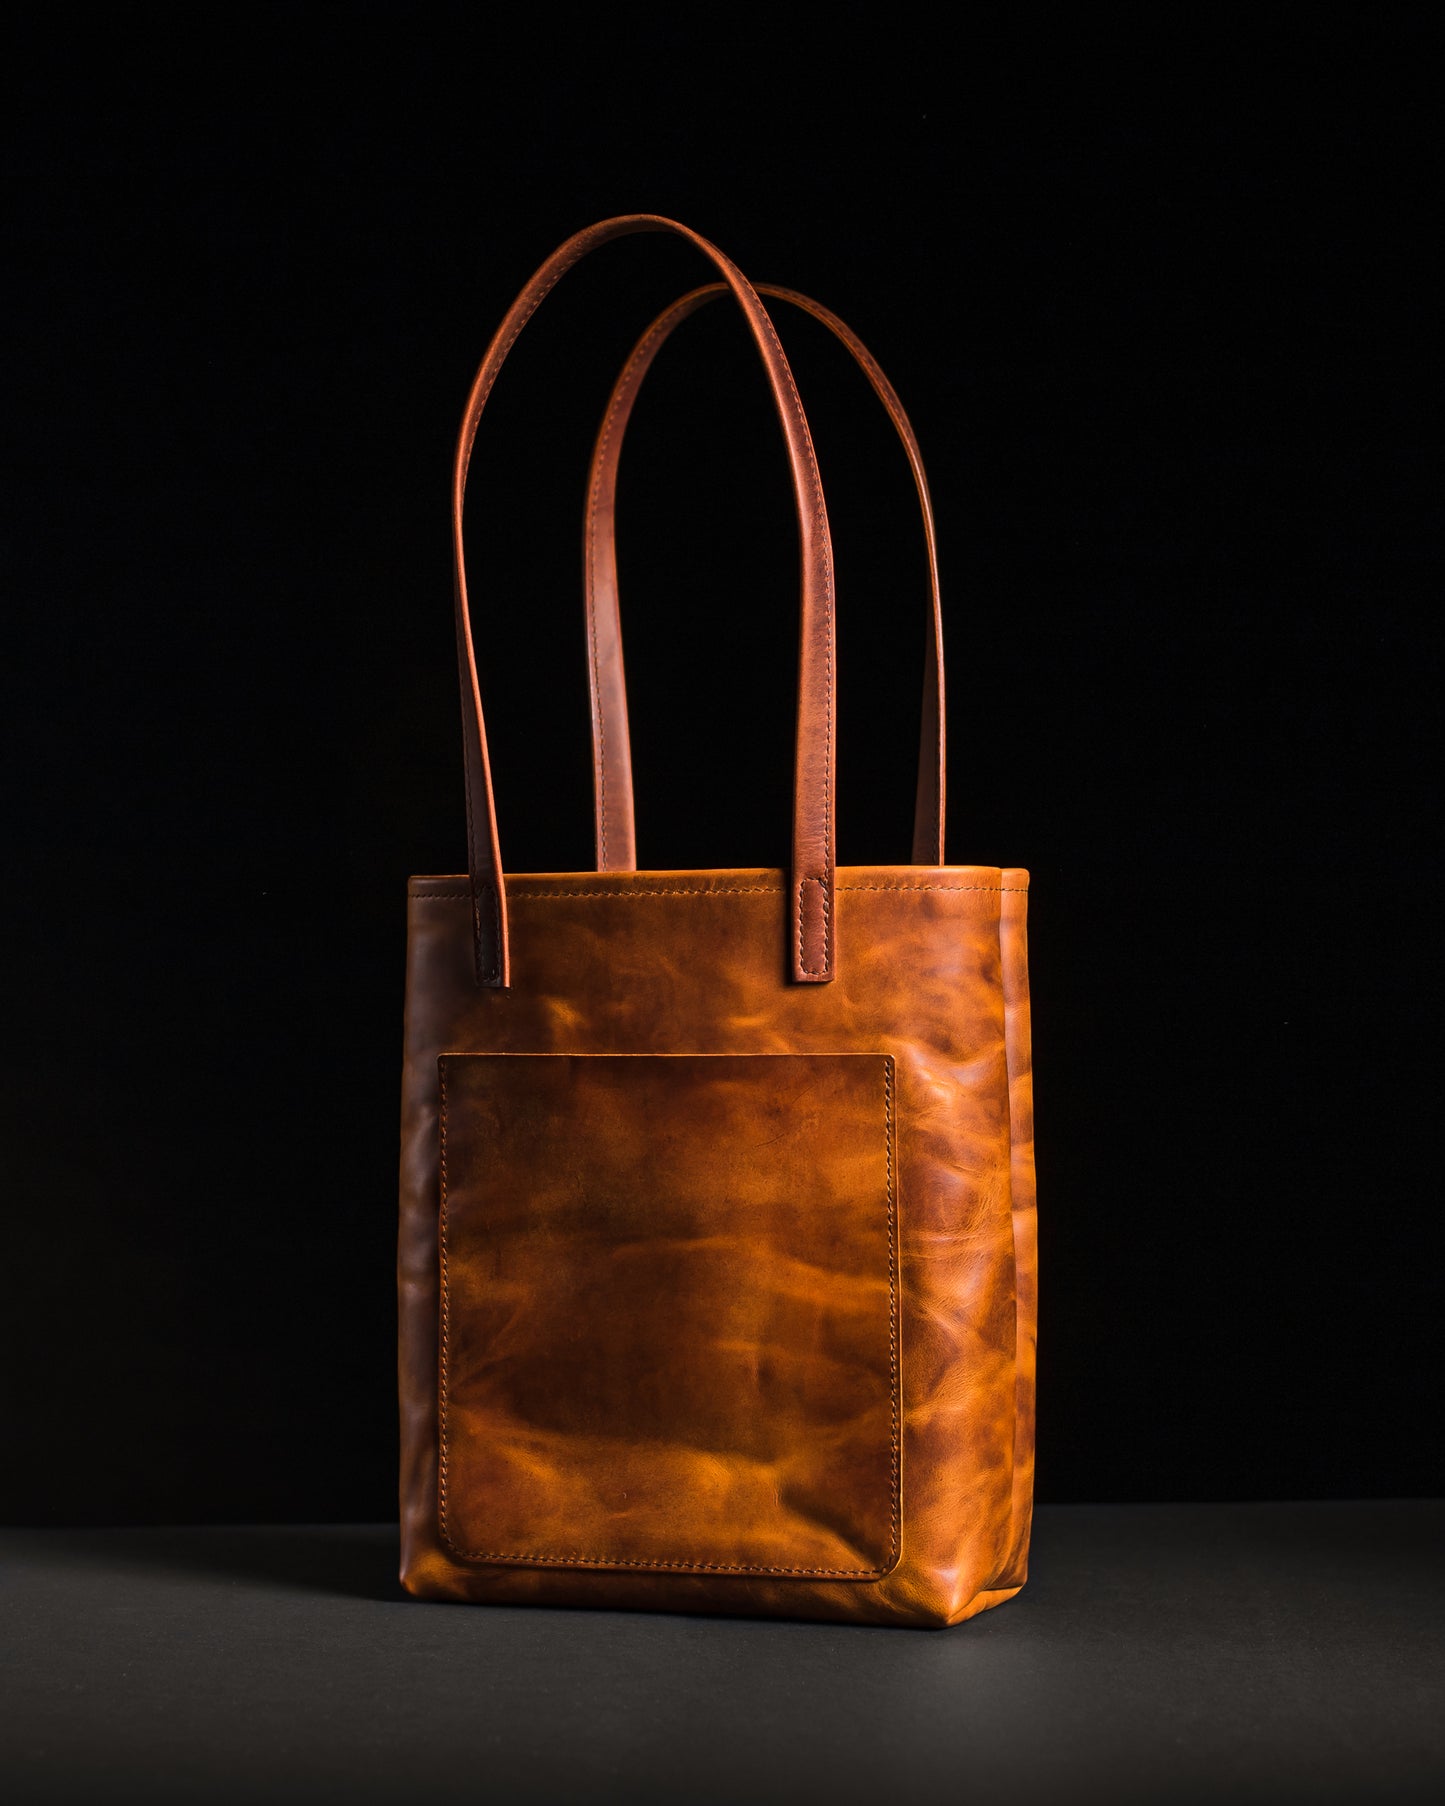 Unisex Leather Tote Bag by Grubble